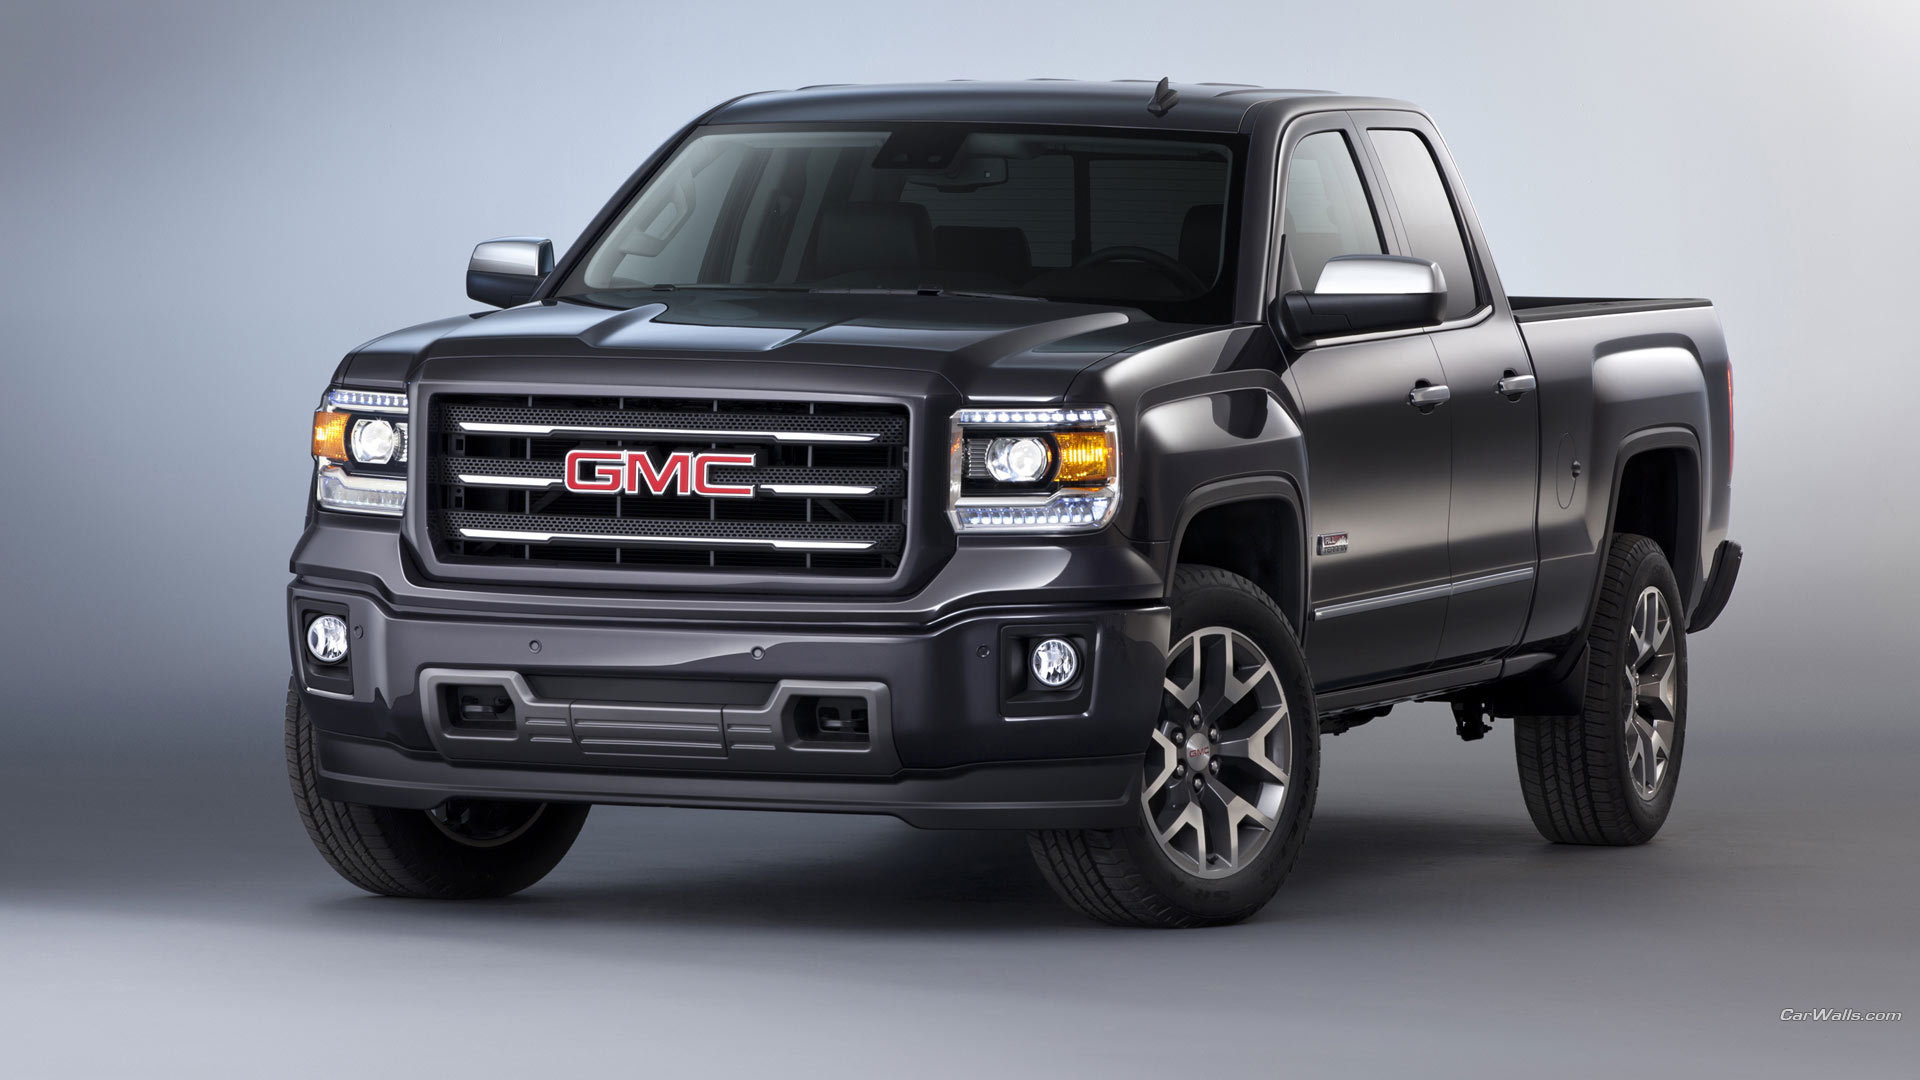 110+ GMC HD Wallpapers and Backgrounds